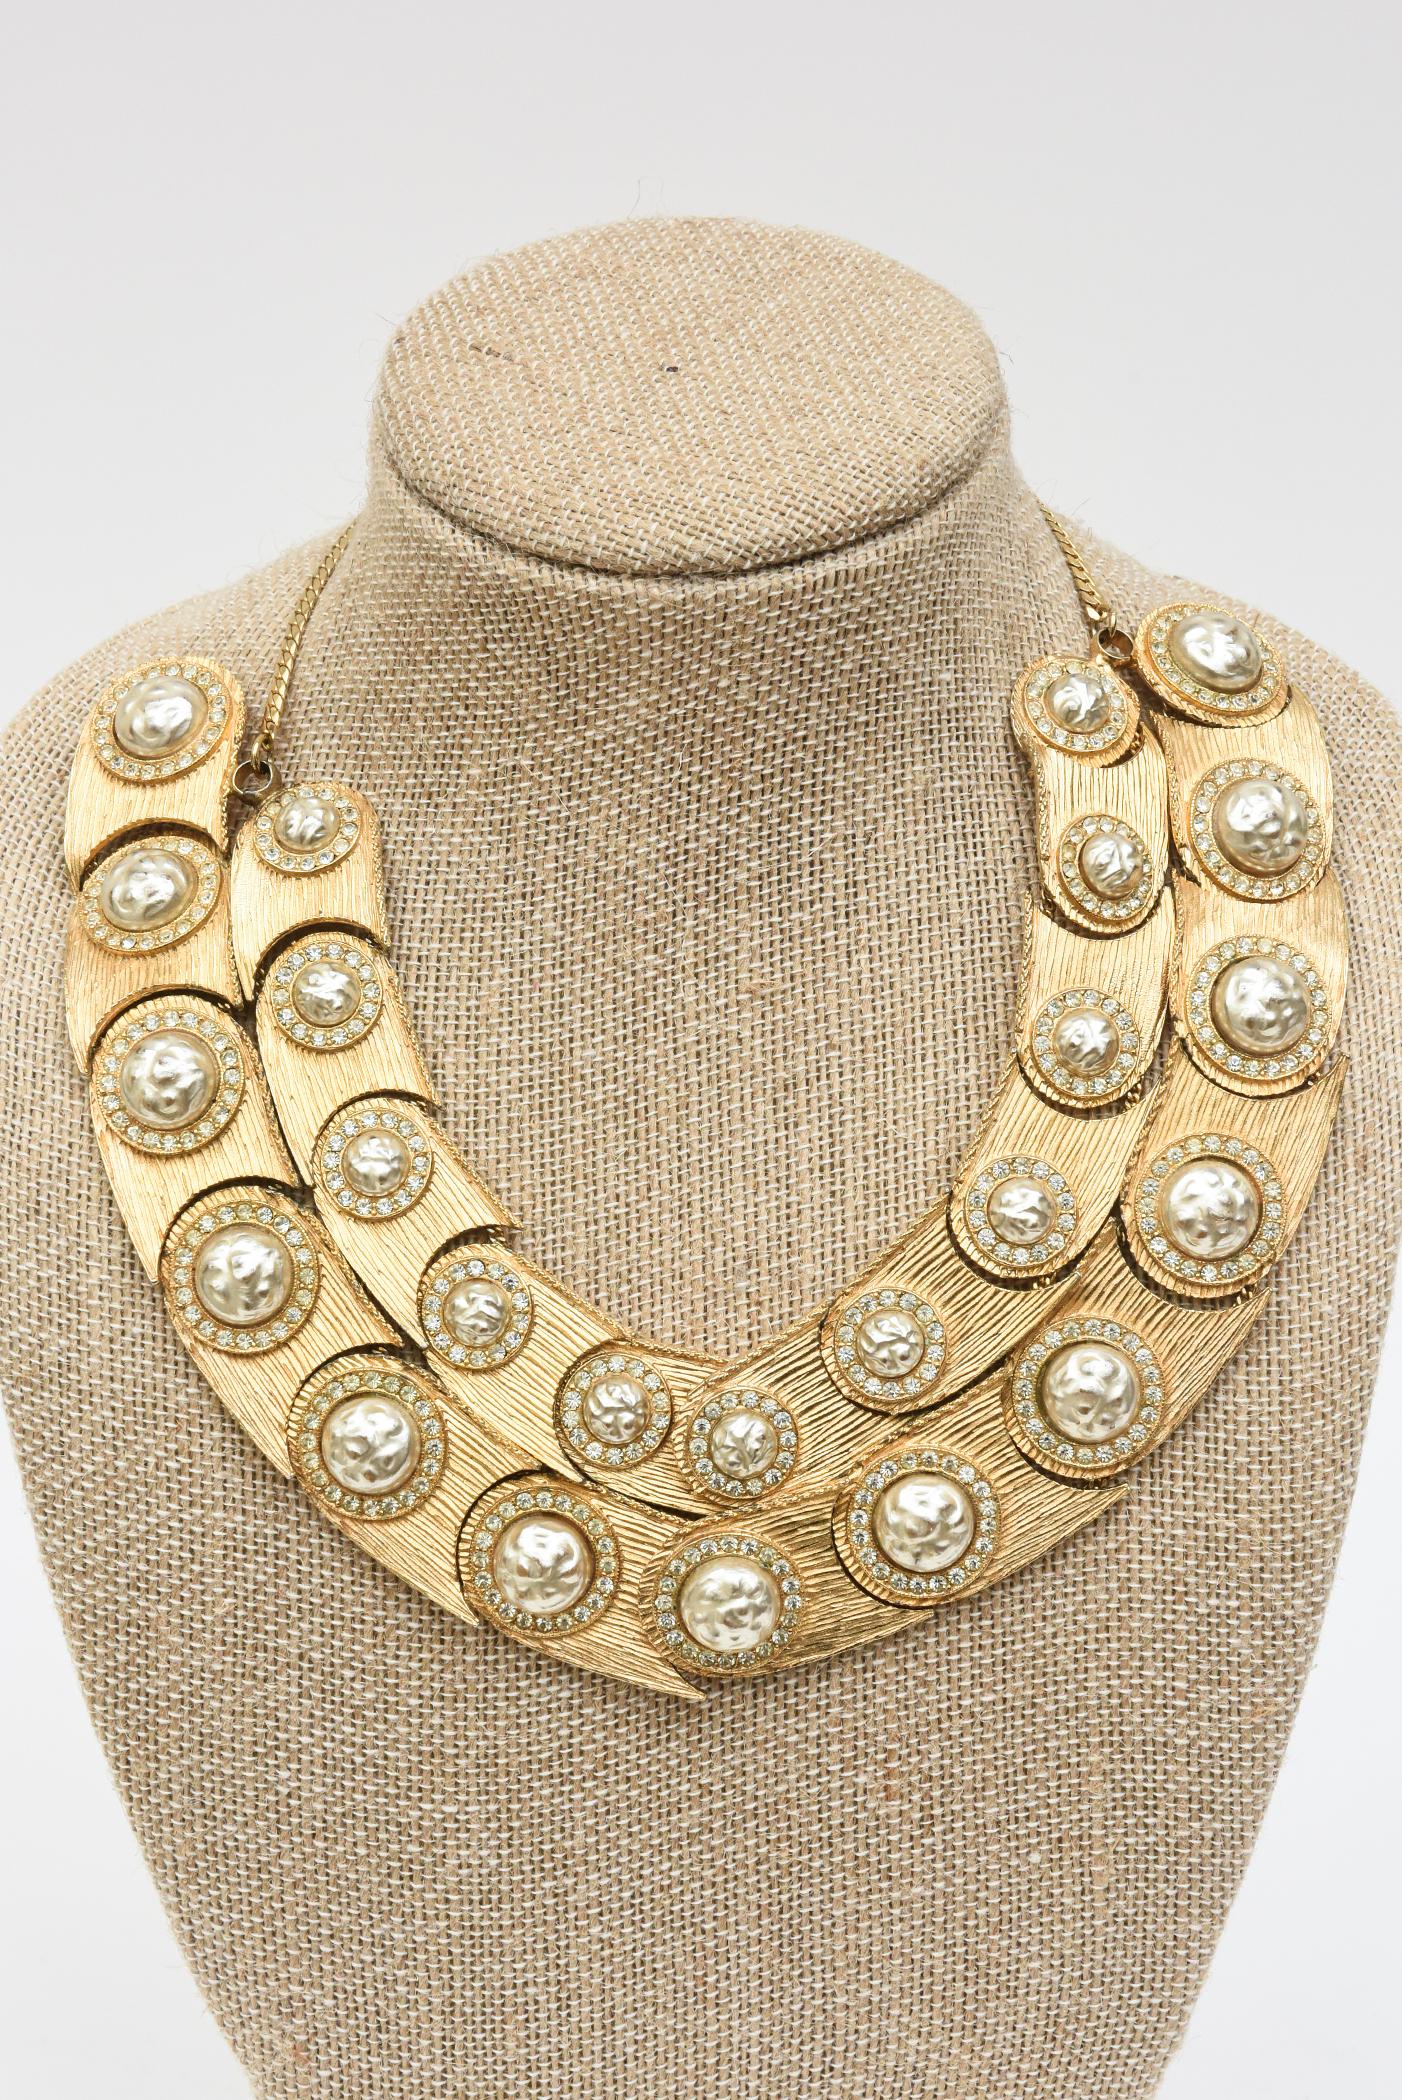 Women's Mosell Vintage Faux Baroque Pearl, Rhinestone, Gilt Metal Bib Necklace For Sale